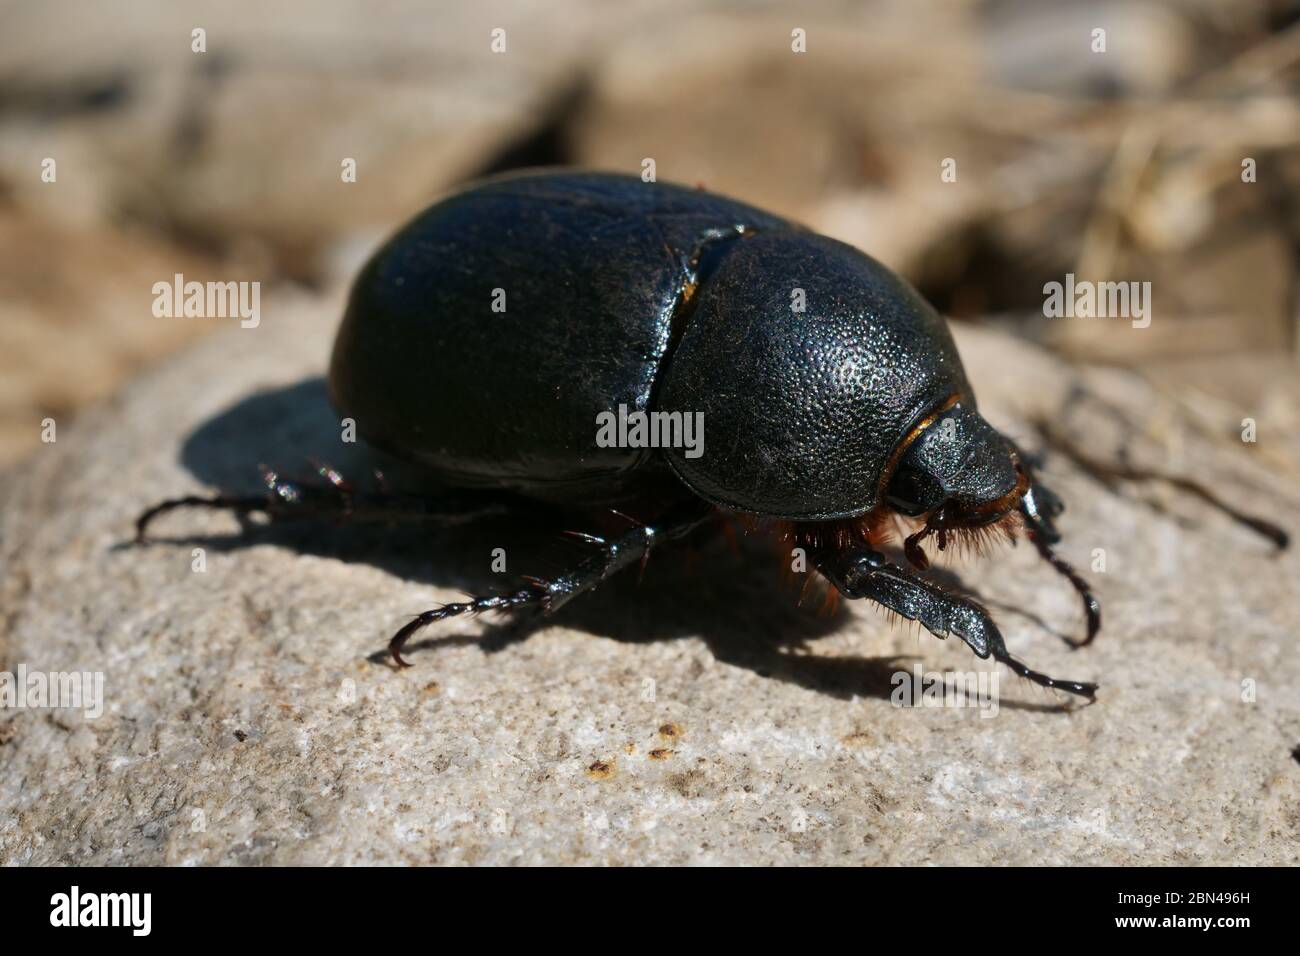 Scarabeo High Resolution Stock Photography and Images - Alamy